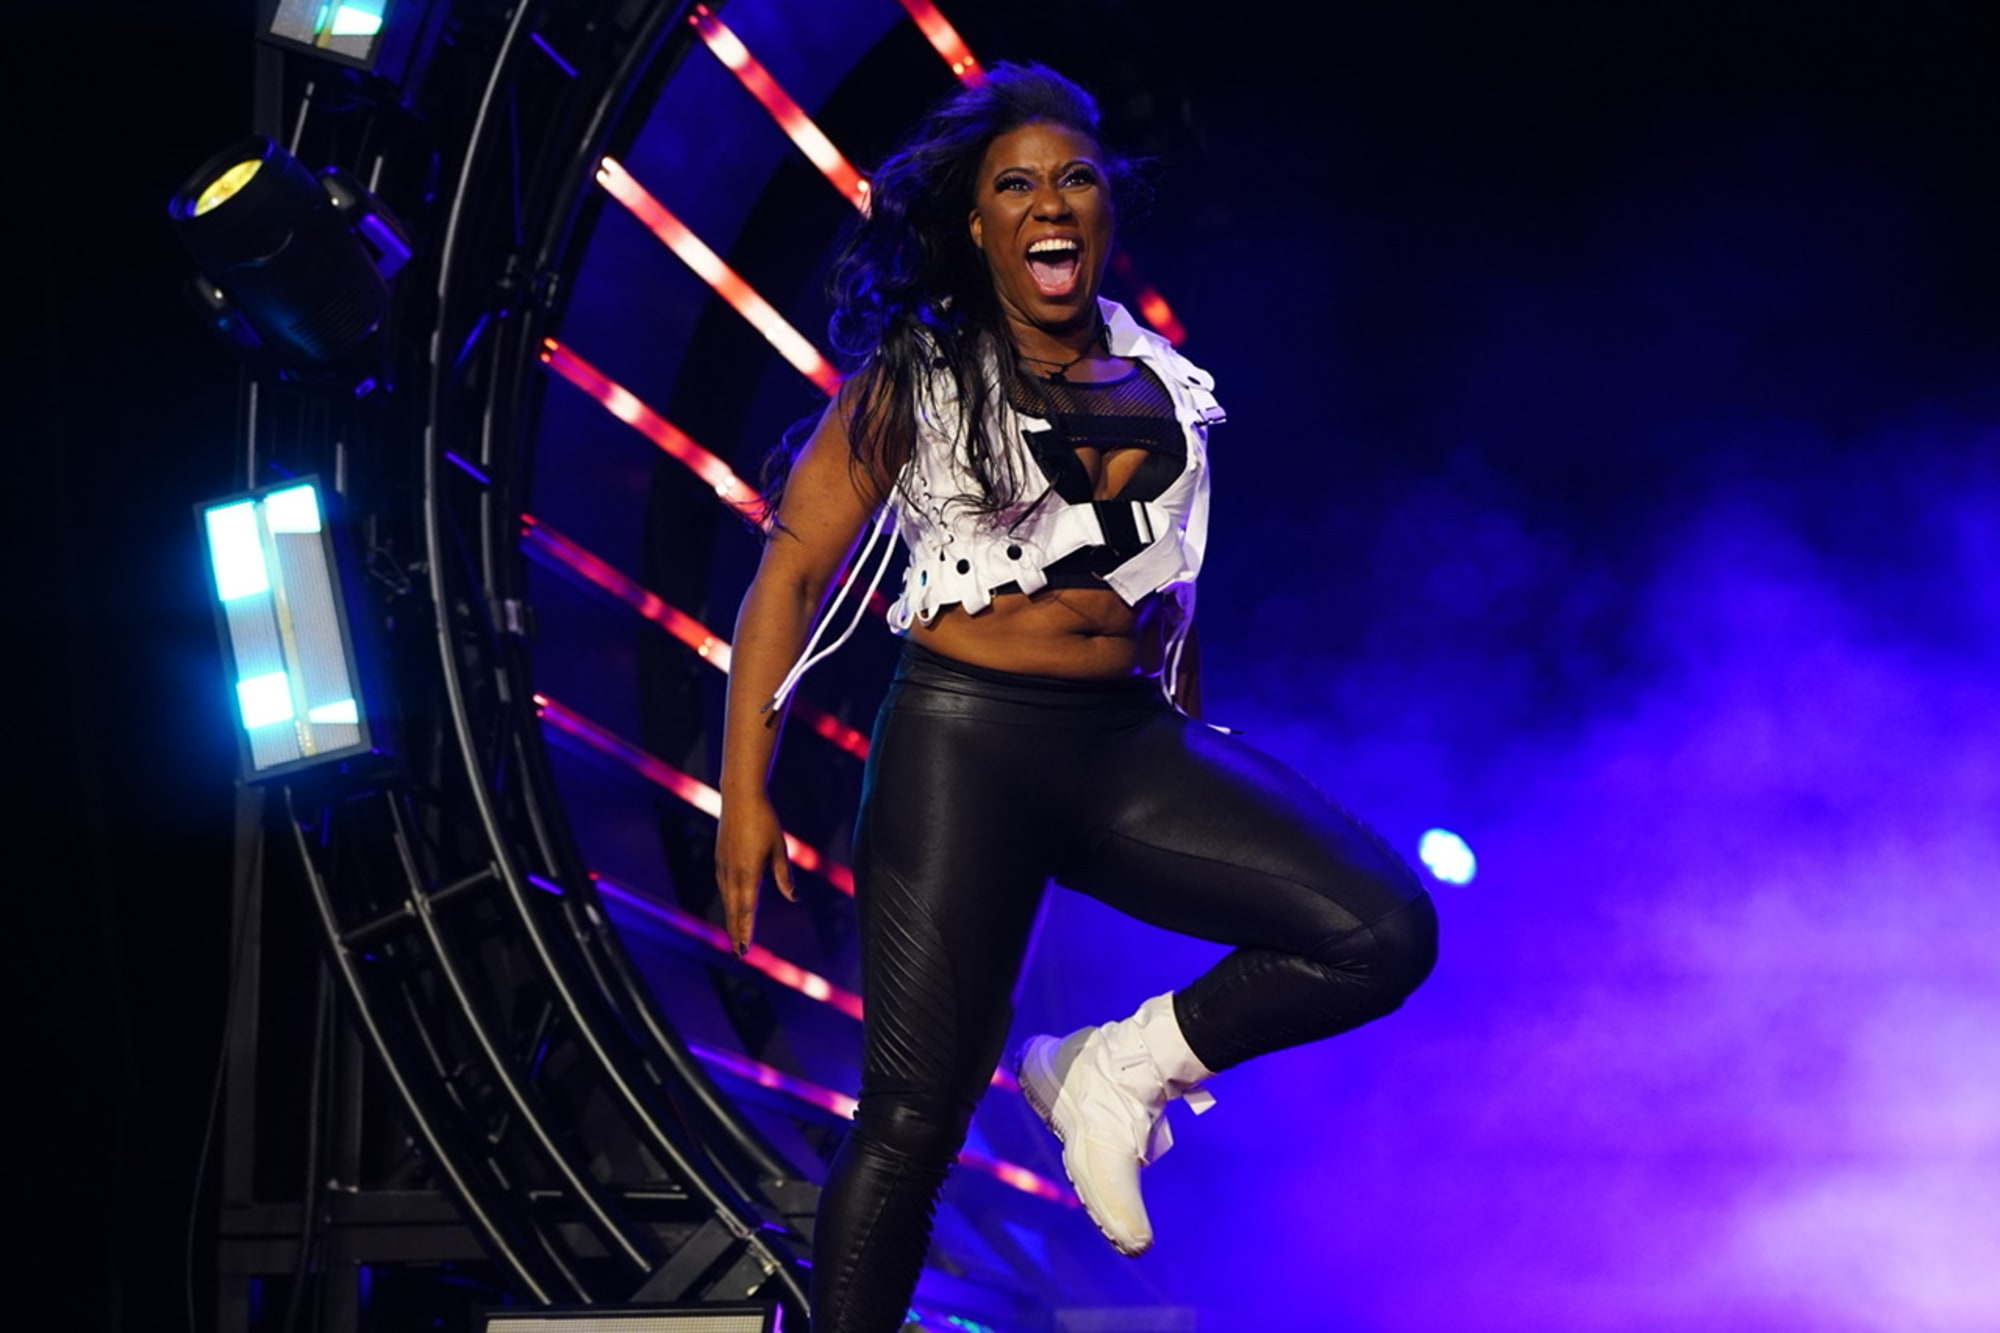 Athena hints at Mercedes Mone’s upcoming appearance on AEW Dynamite: Major developments in store